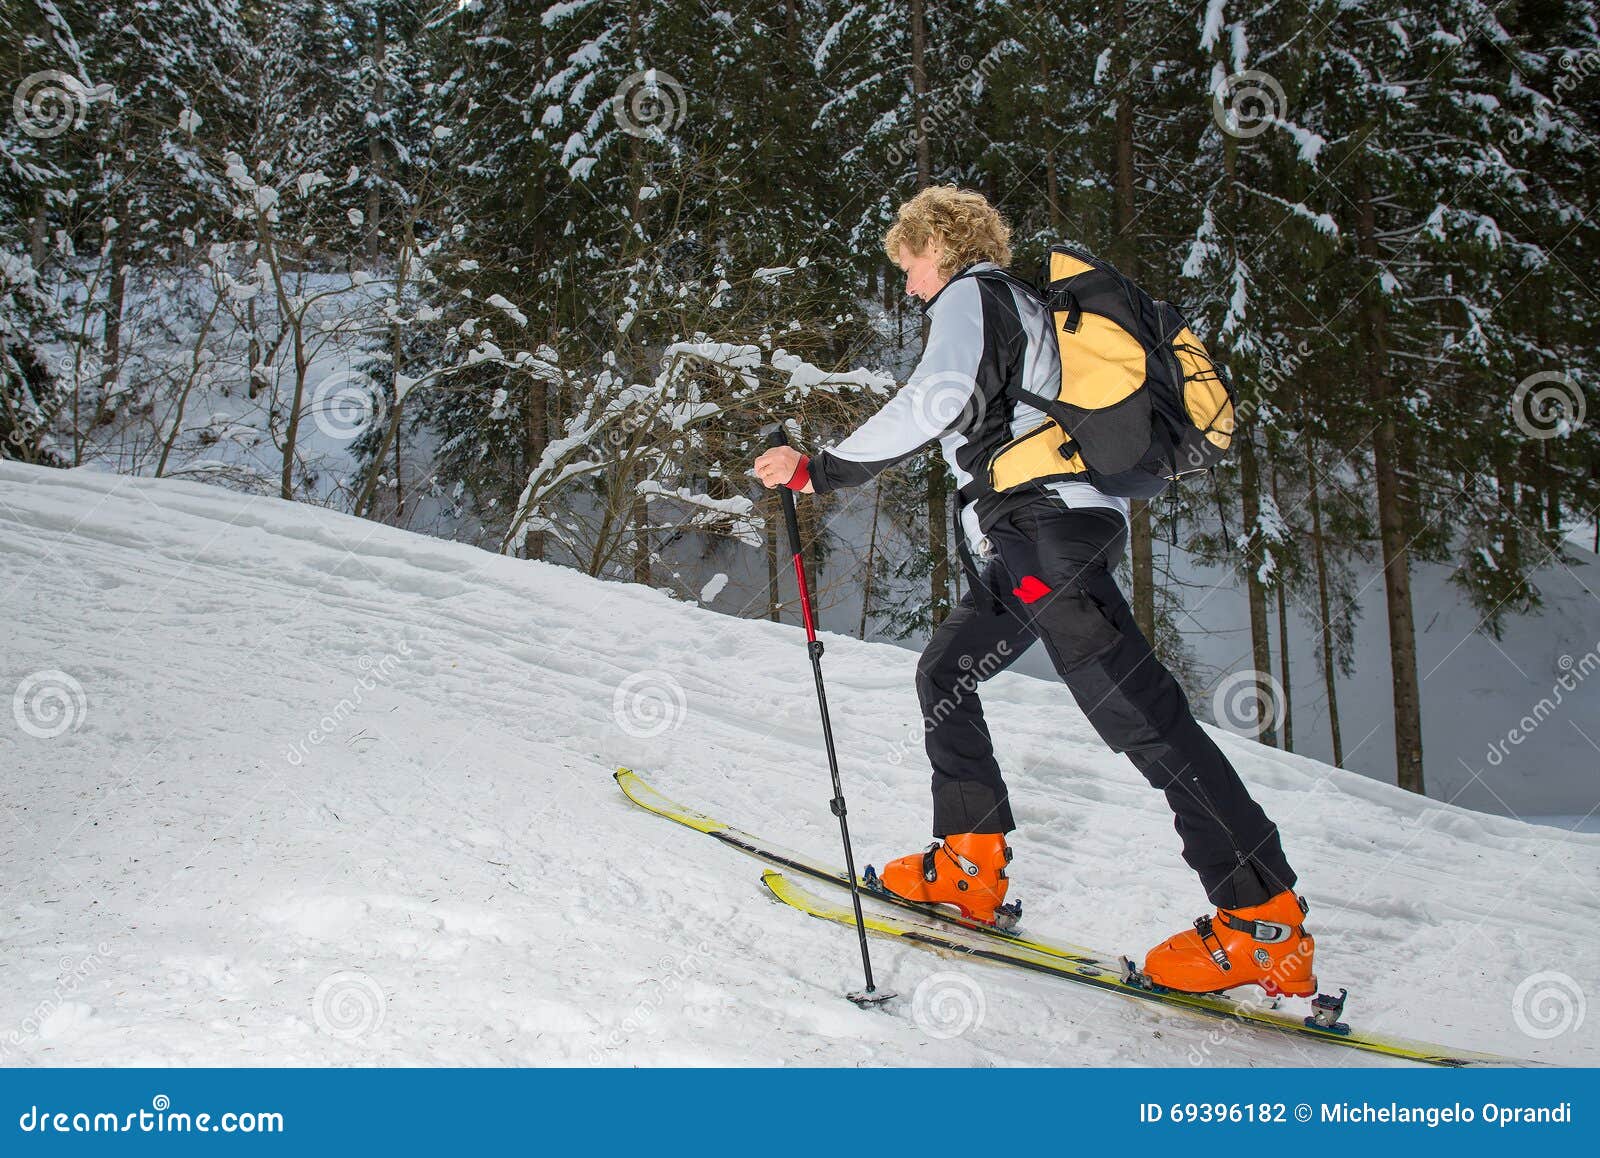 Woman With Ski Uphill Climbing Stock Photo Image 69396182 throughout Elegant  how to ski uphill regarding Your house